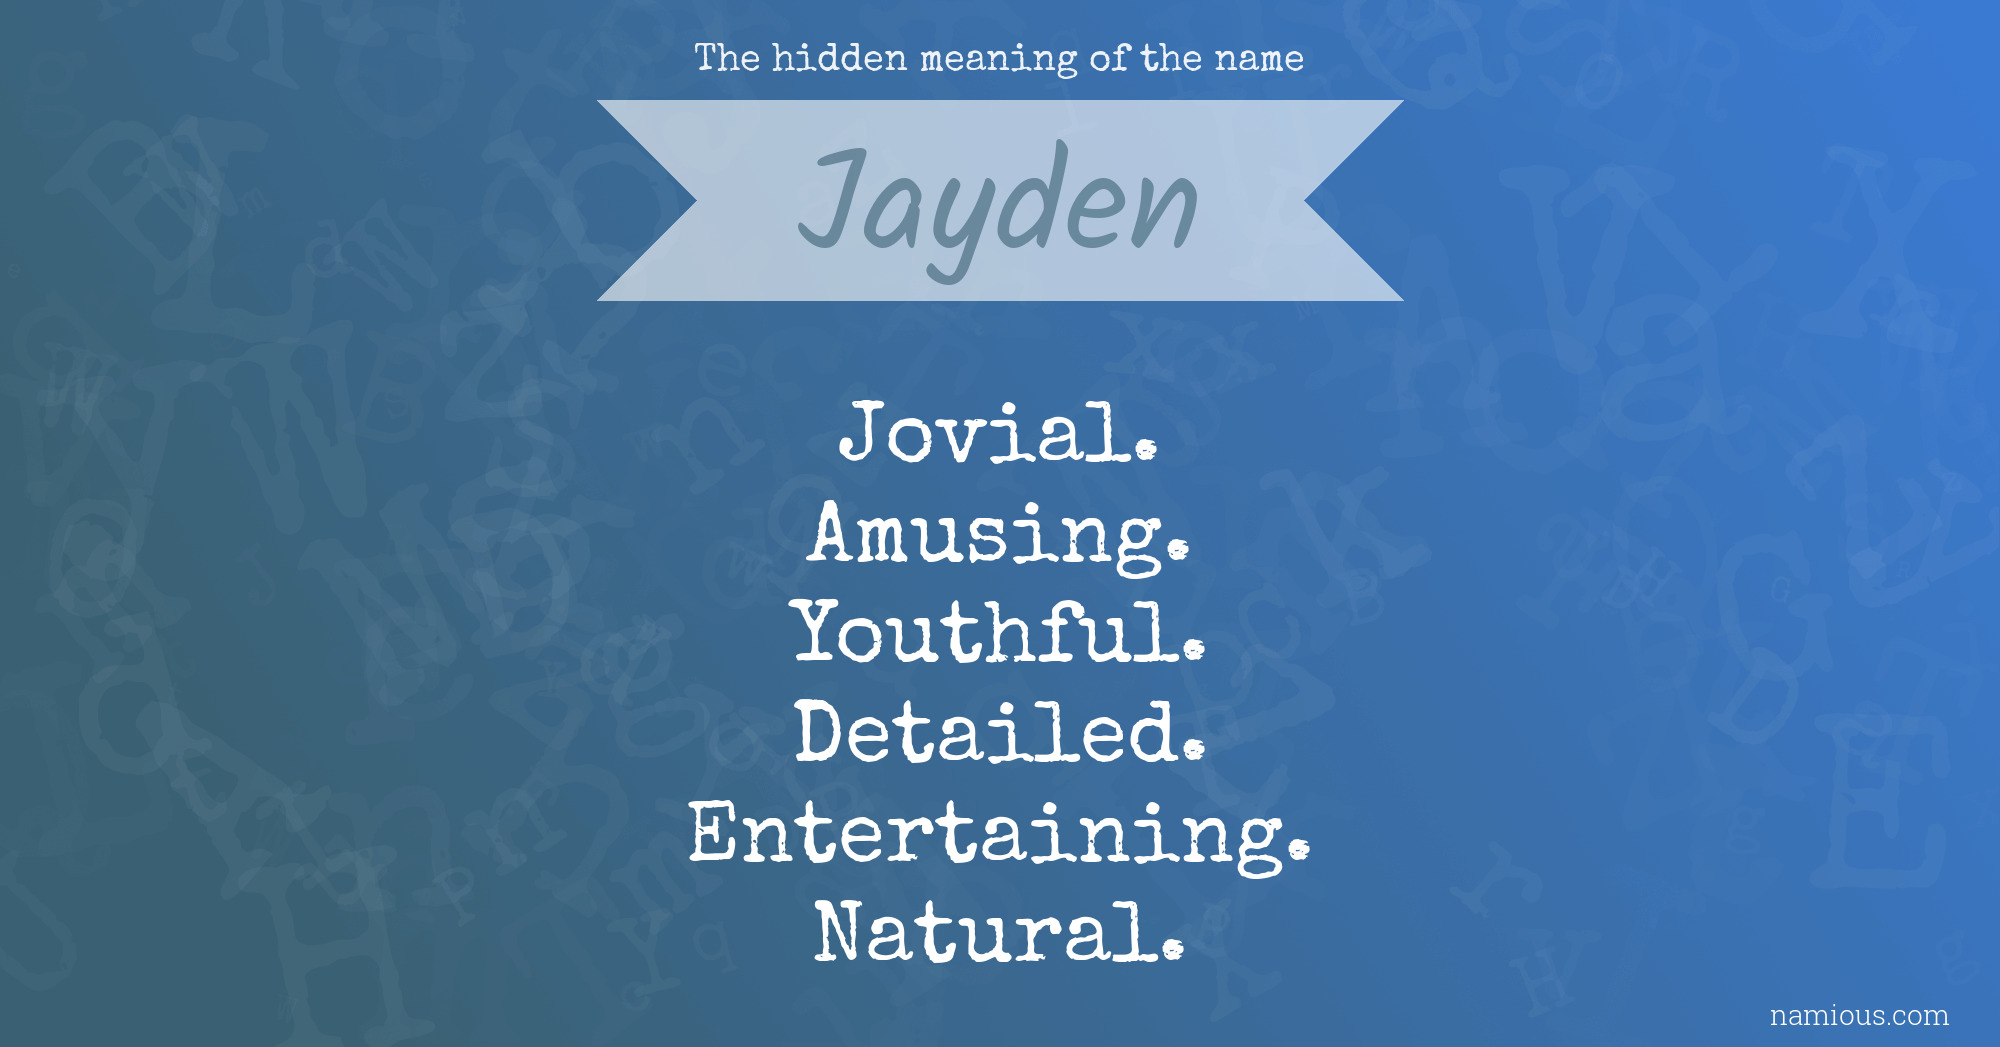 The hidden meaning of the name Jayden